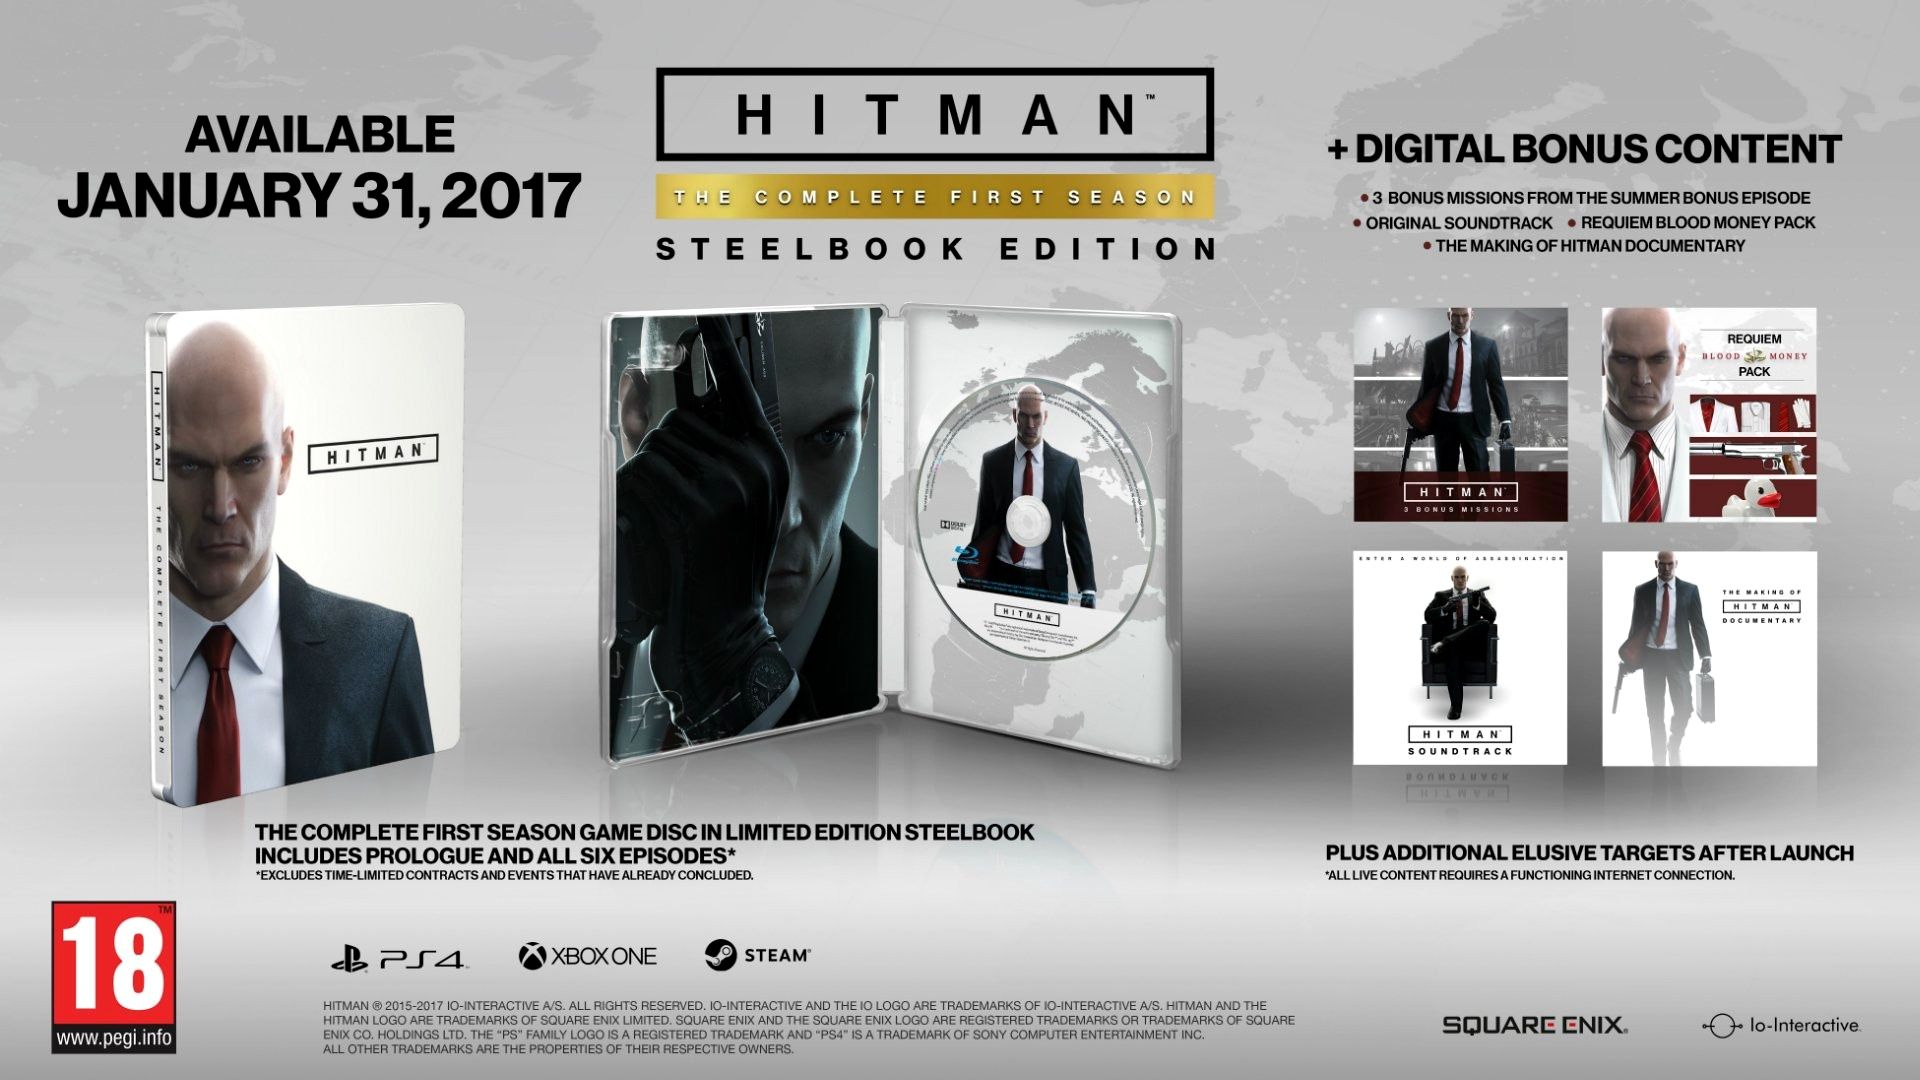 Ioi Hands Out Hitman S First Season But Picking It Up Isn T Easy Review Freemmorpg Top